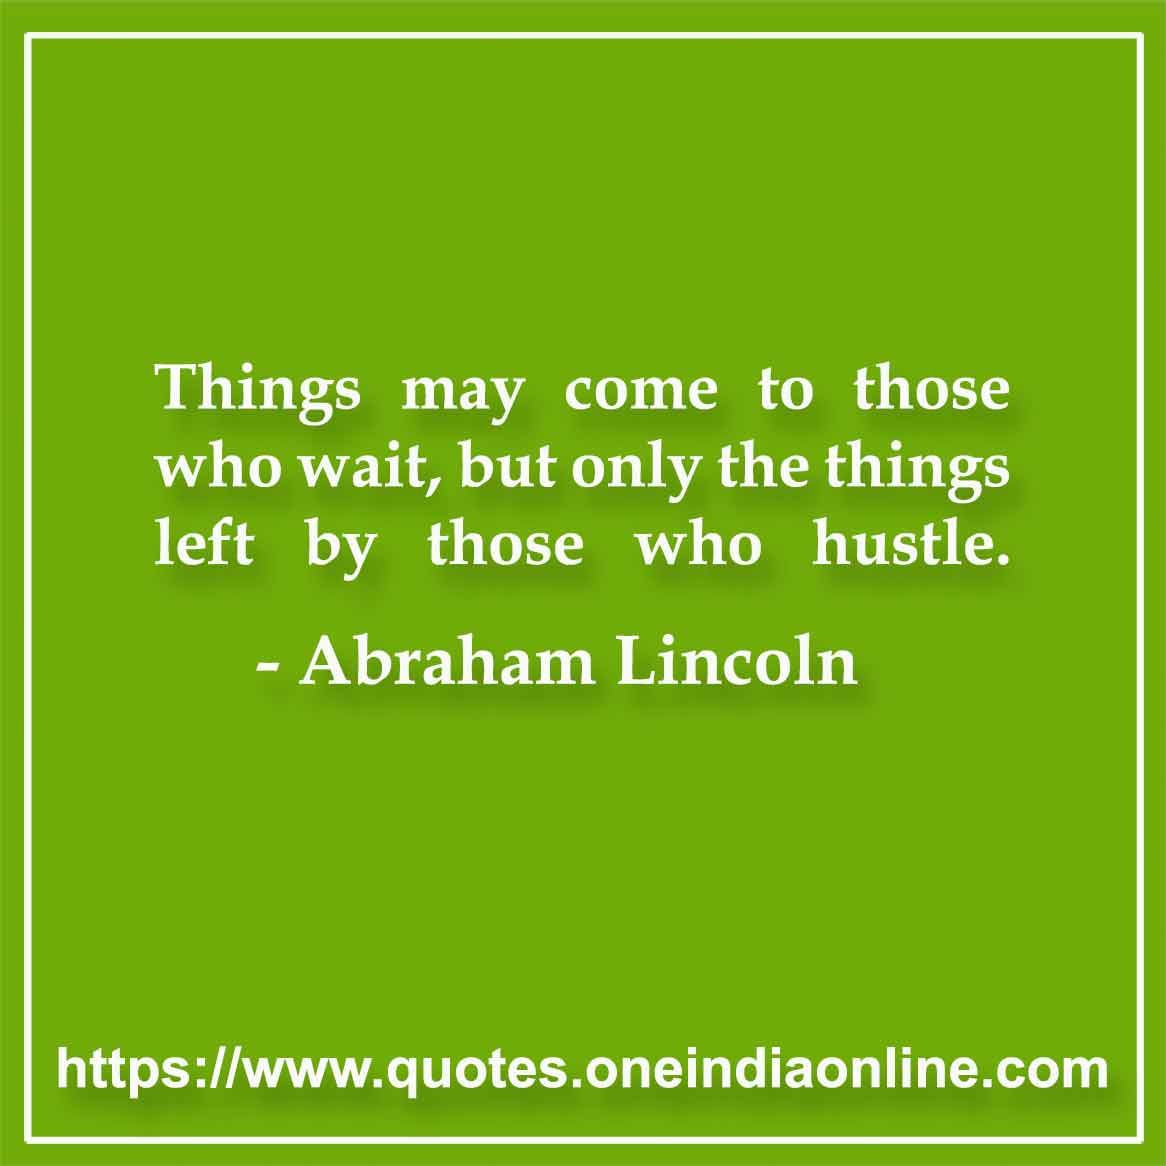 Things may come to those who wait, but only the things left by those who hustle.

-  Abraham Lincoln